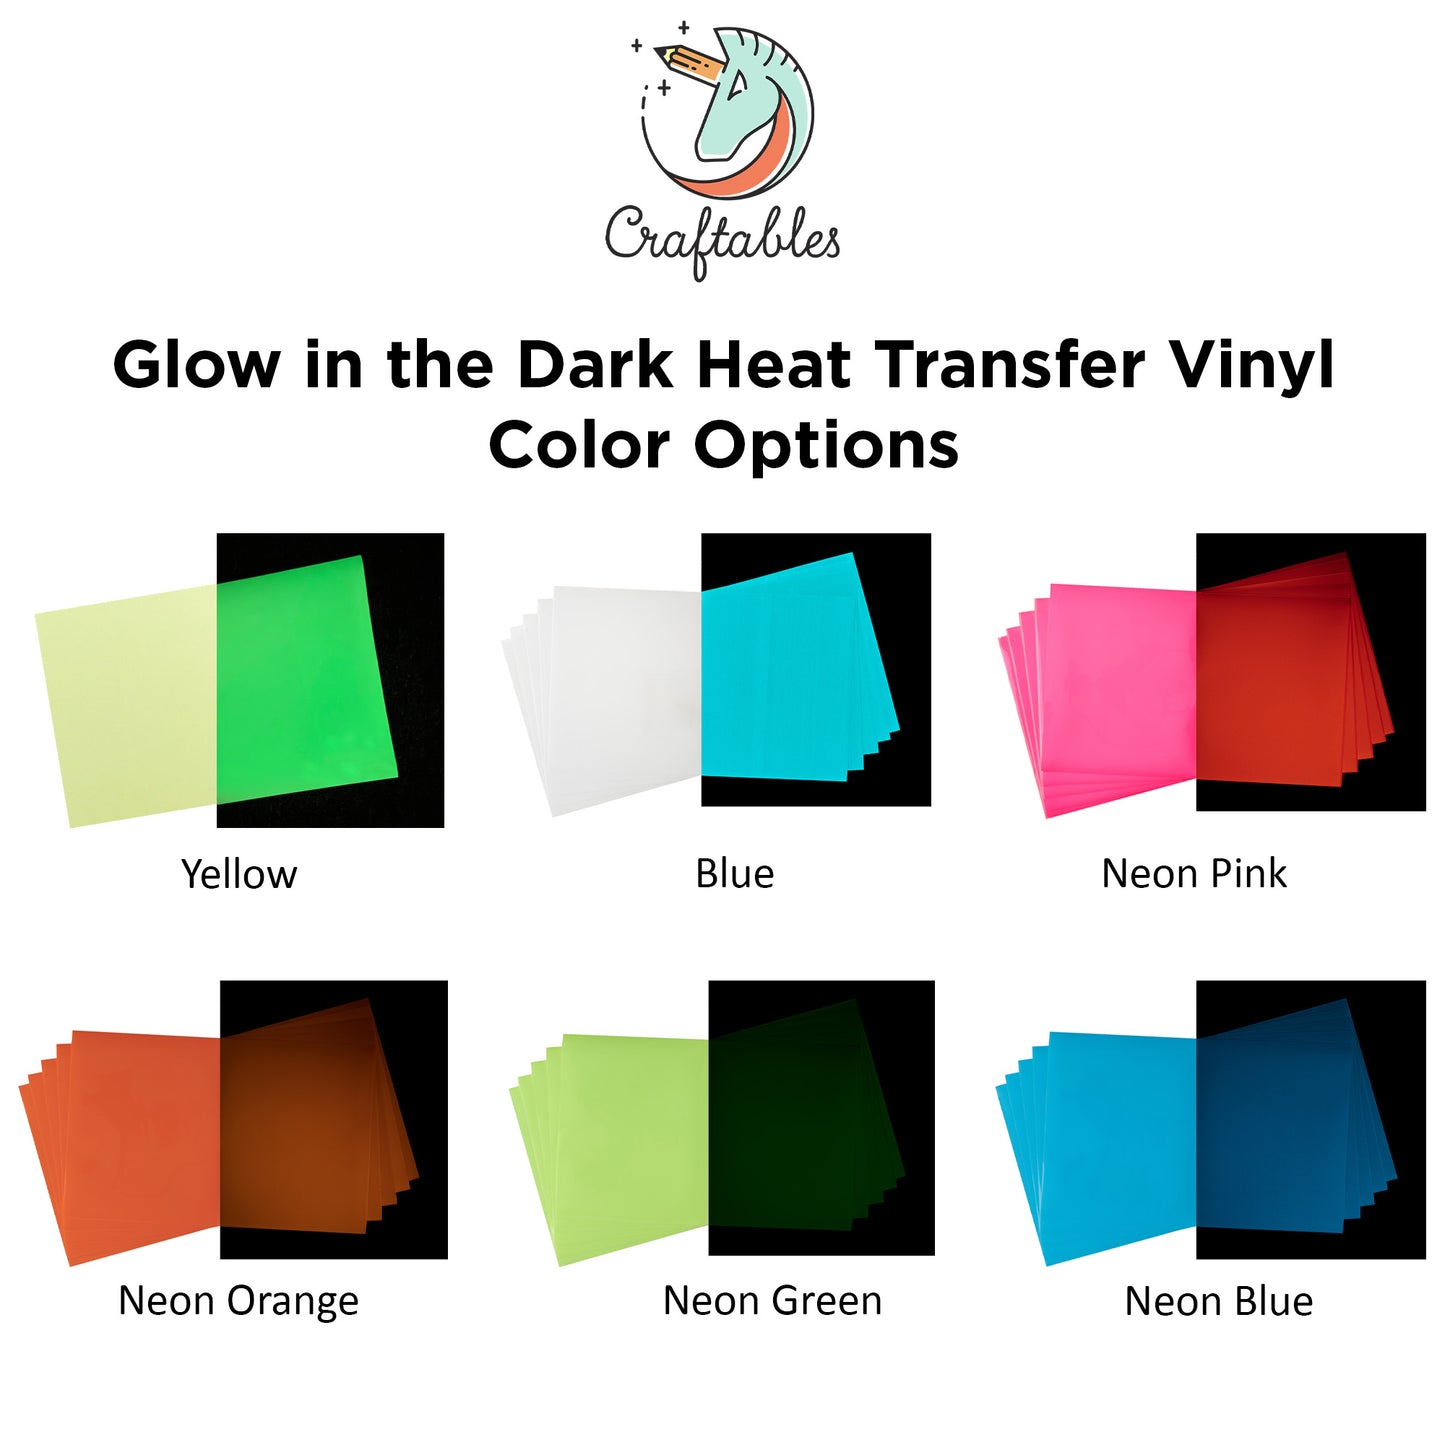 Neon Pink Glow in the Dark Heat Transfer Vinyl Sheets By Craftables